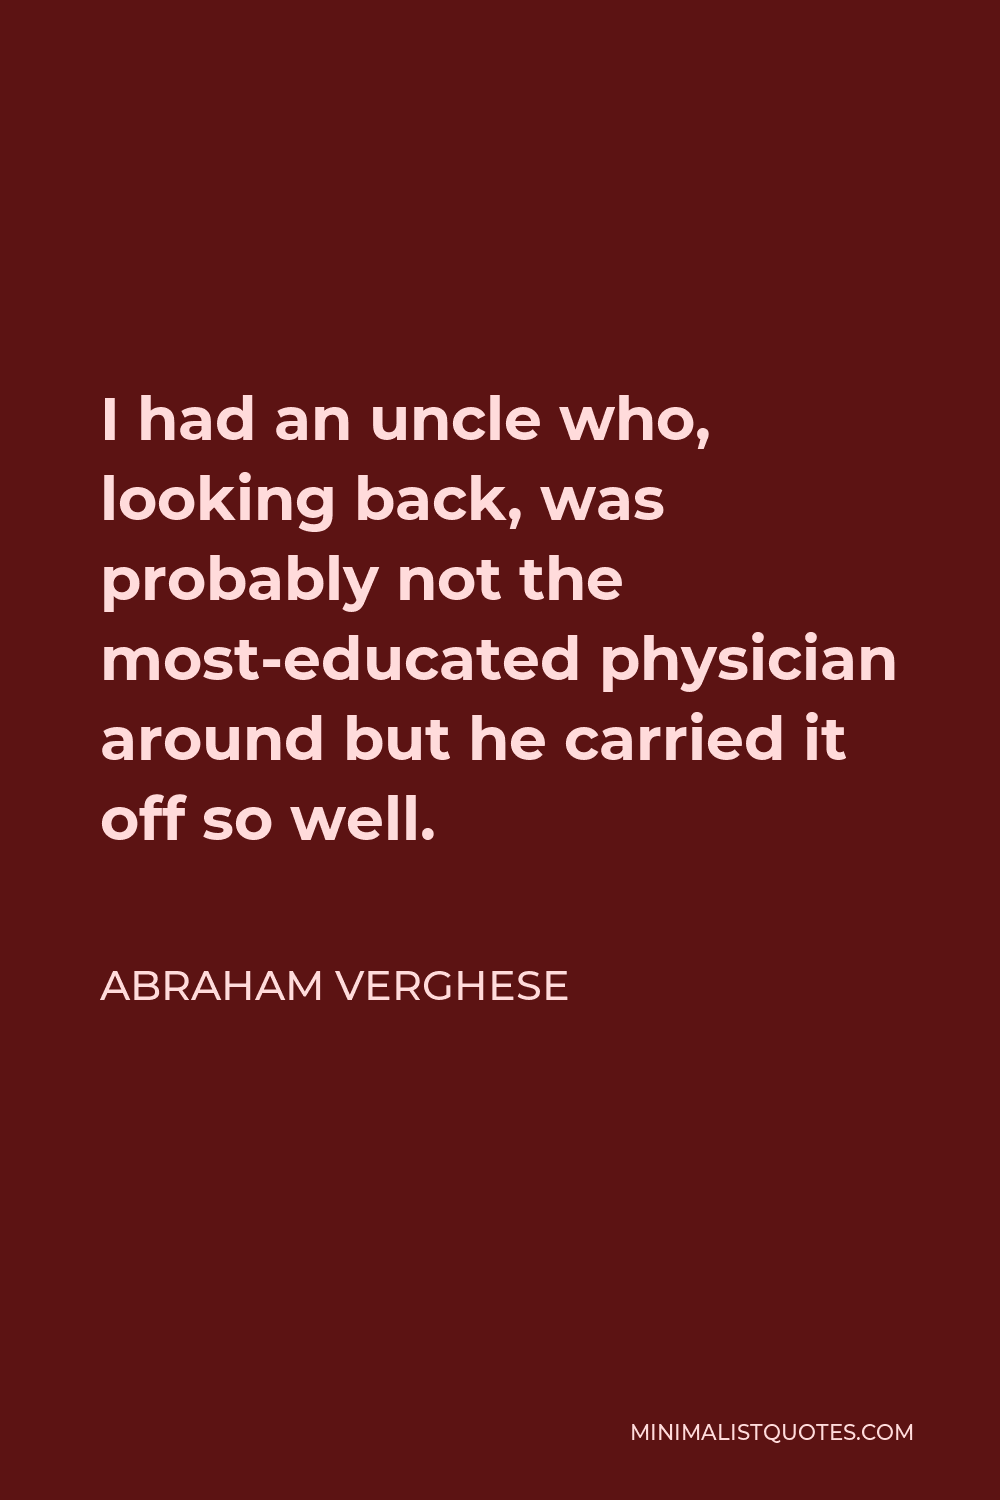 Abraham Verghese Quote - I had an uncle who, looking back, was probably not the most-educated physician around but he carried it off so well.